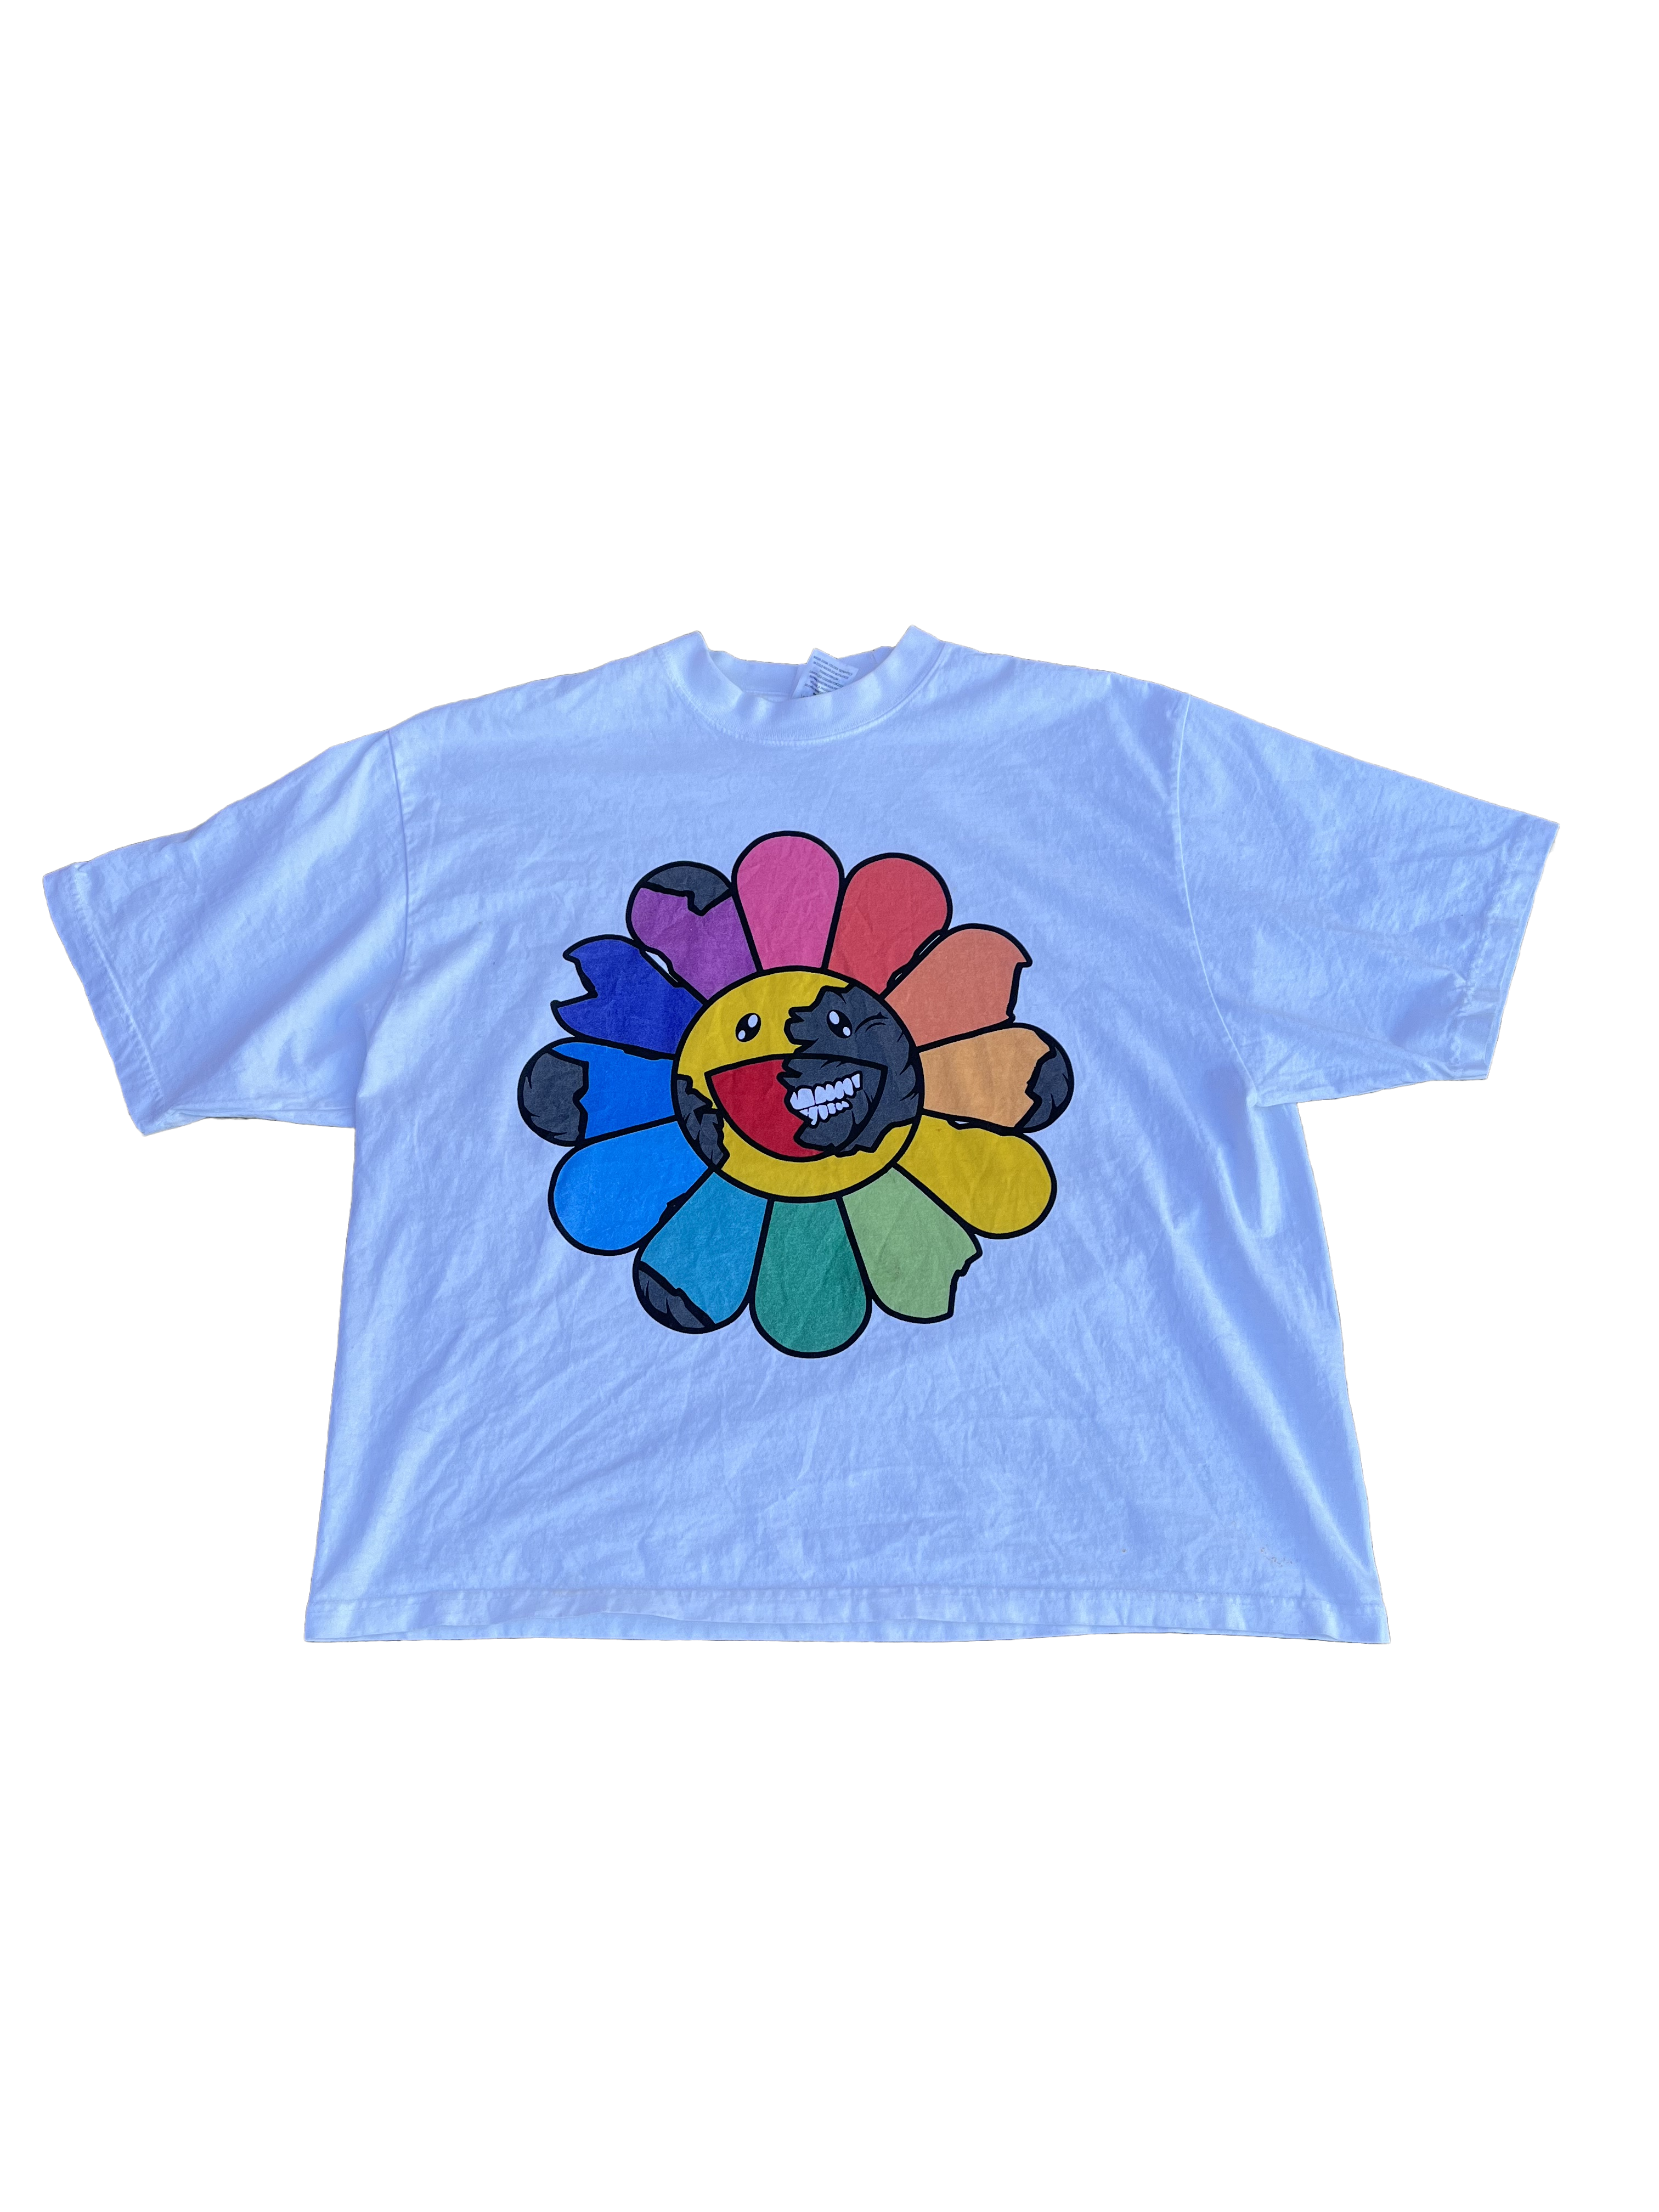 VRS “WITHERED FLOWER” BOXY TEE [$40.00]